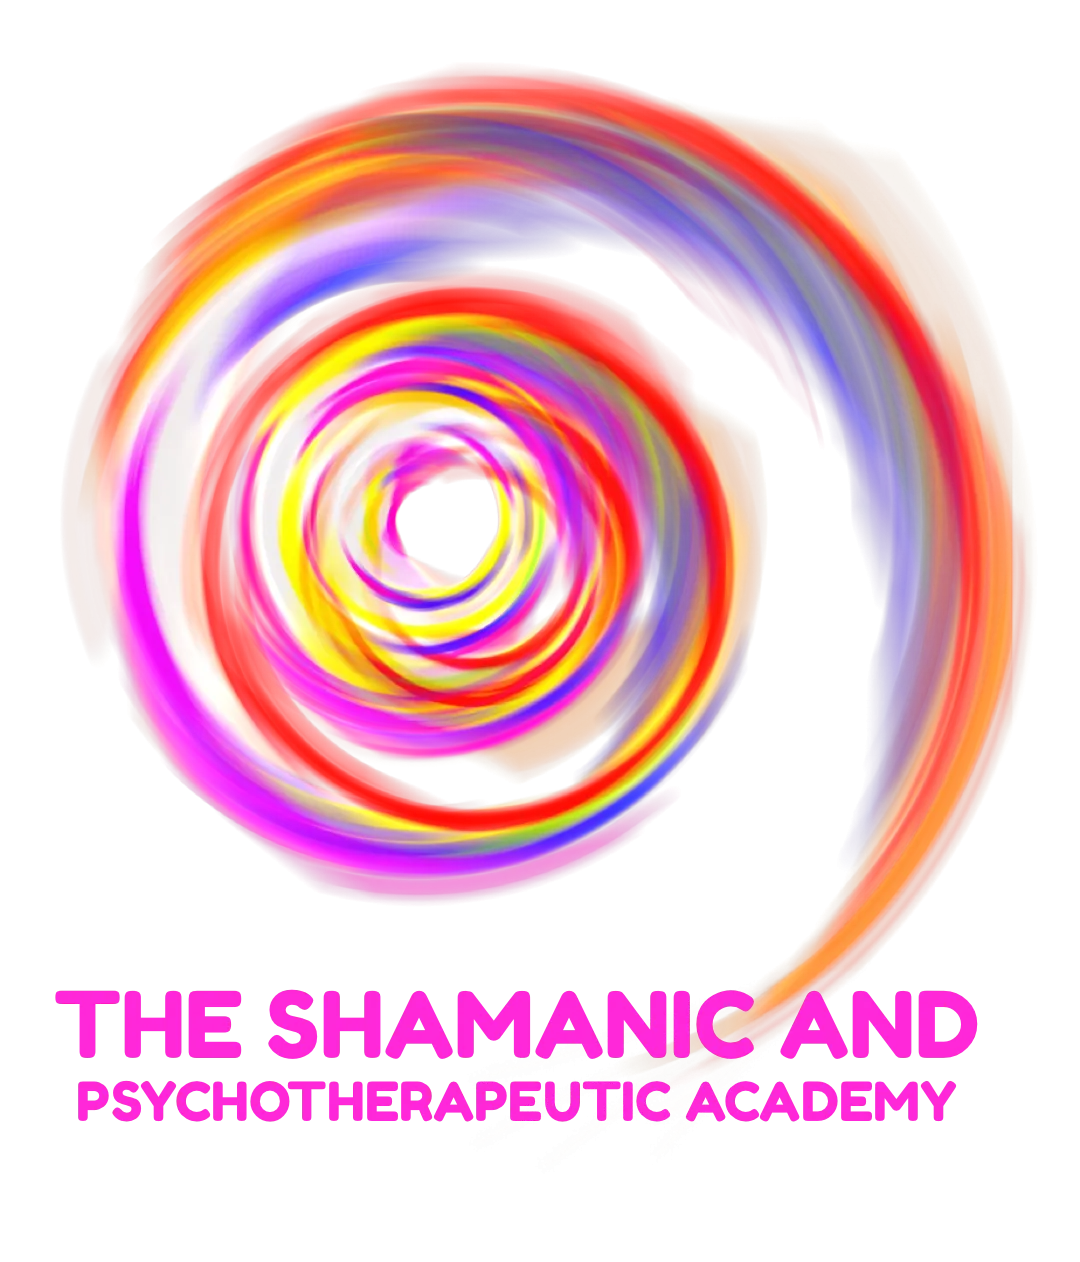 Year 1: “Journey to Becoming the Shaman”